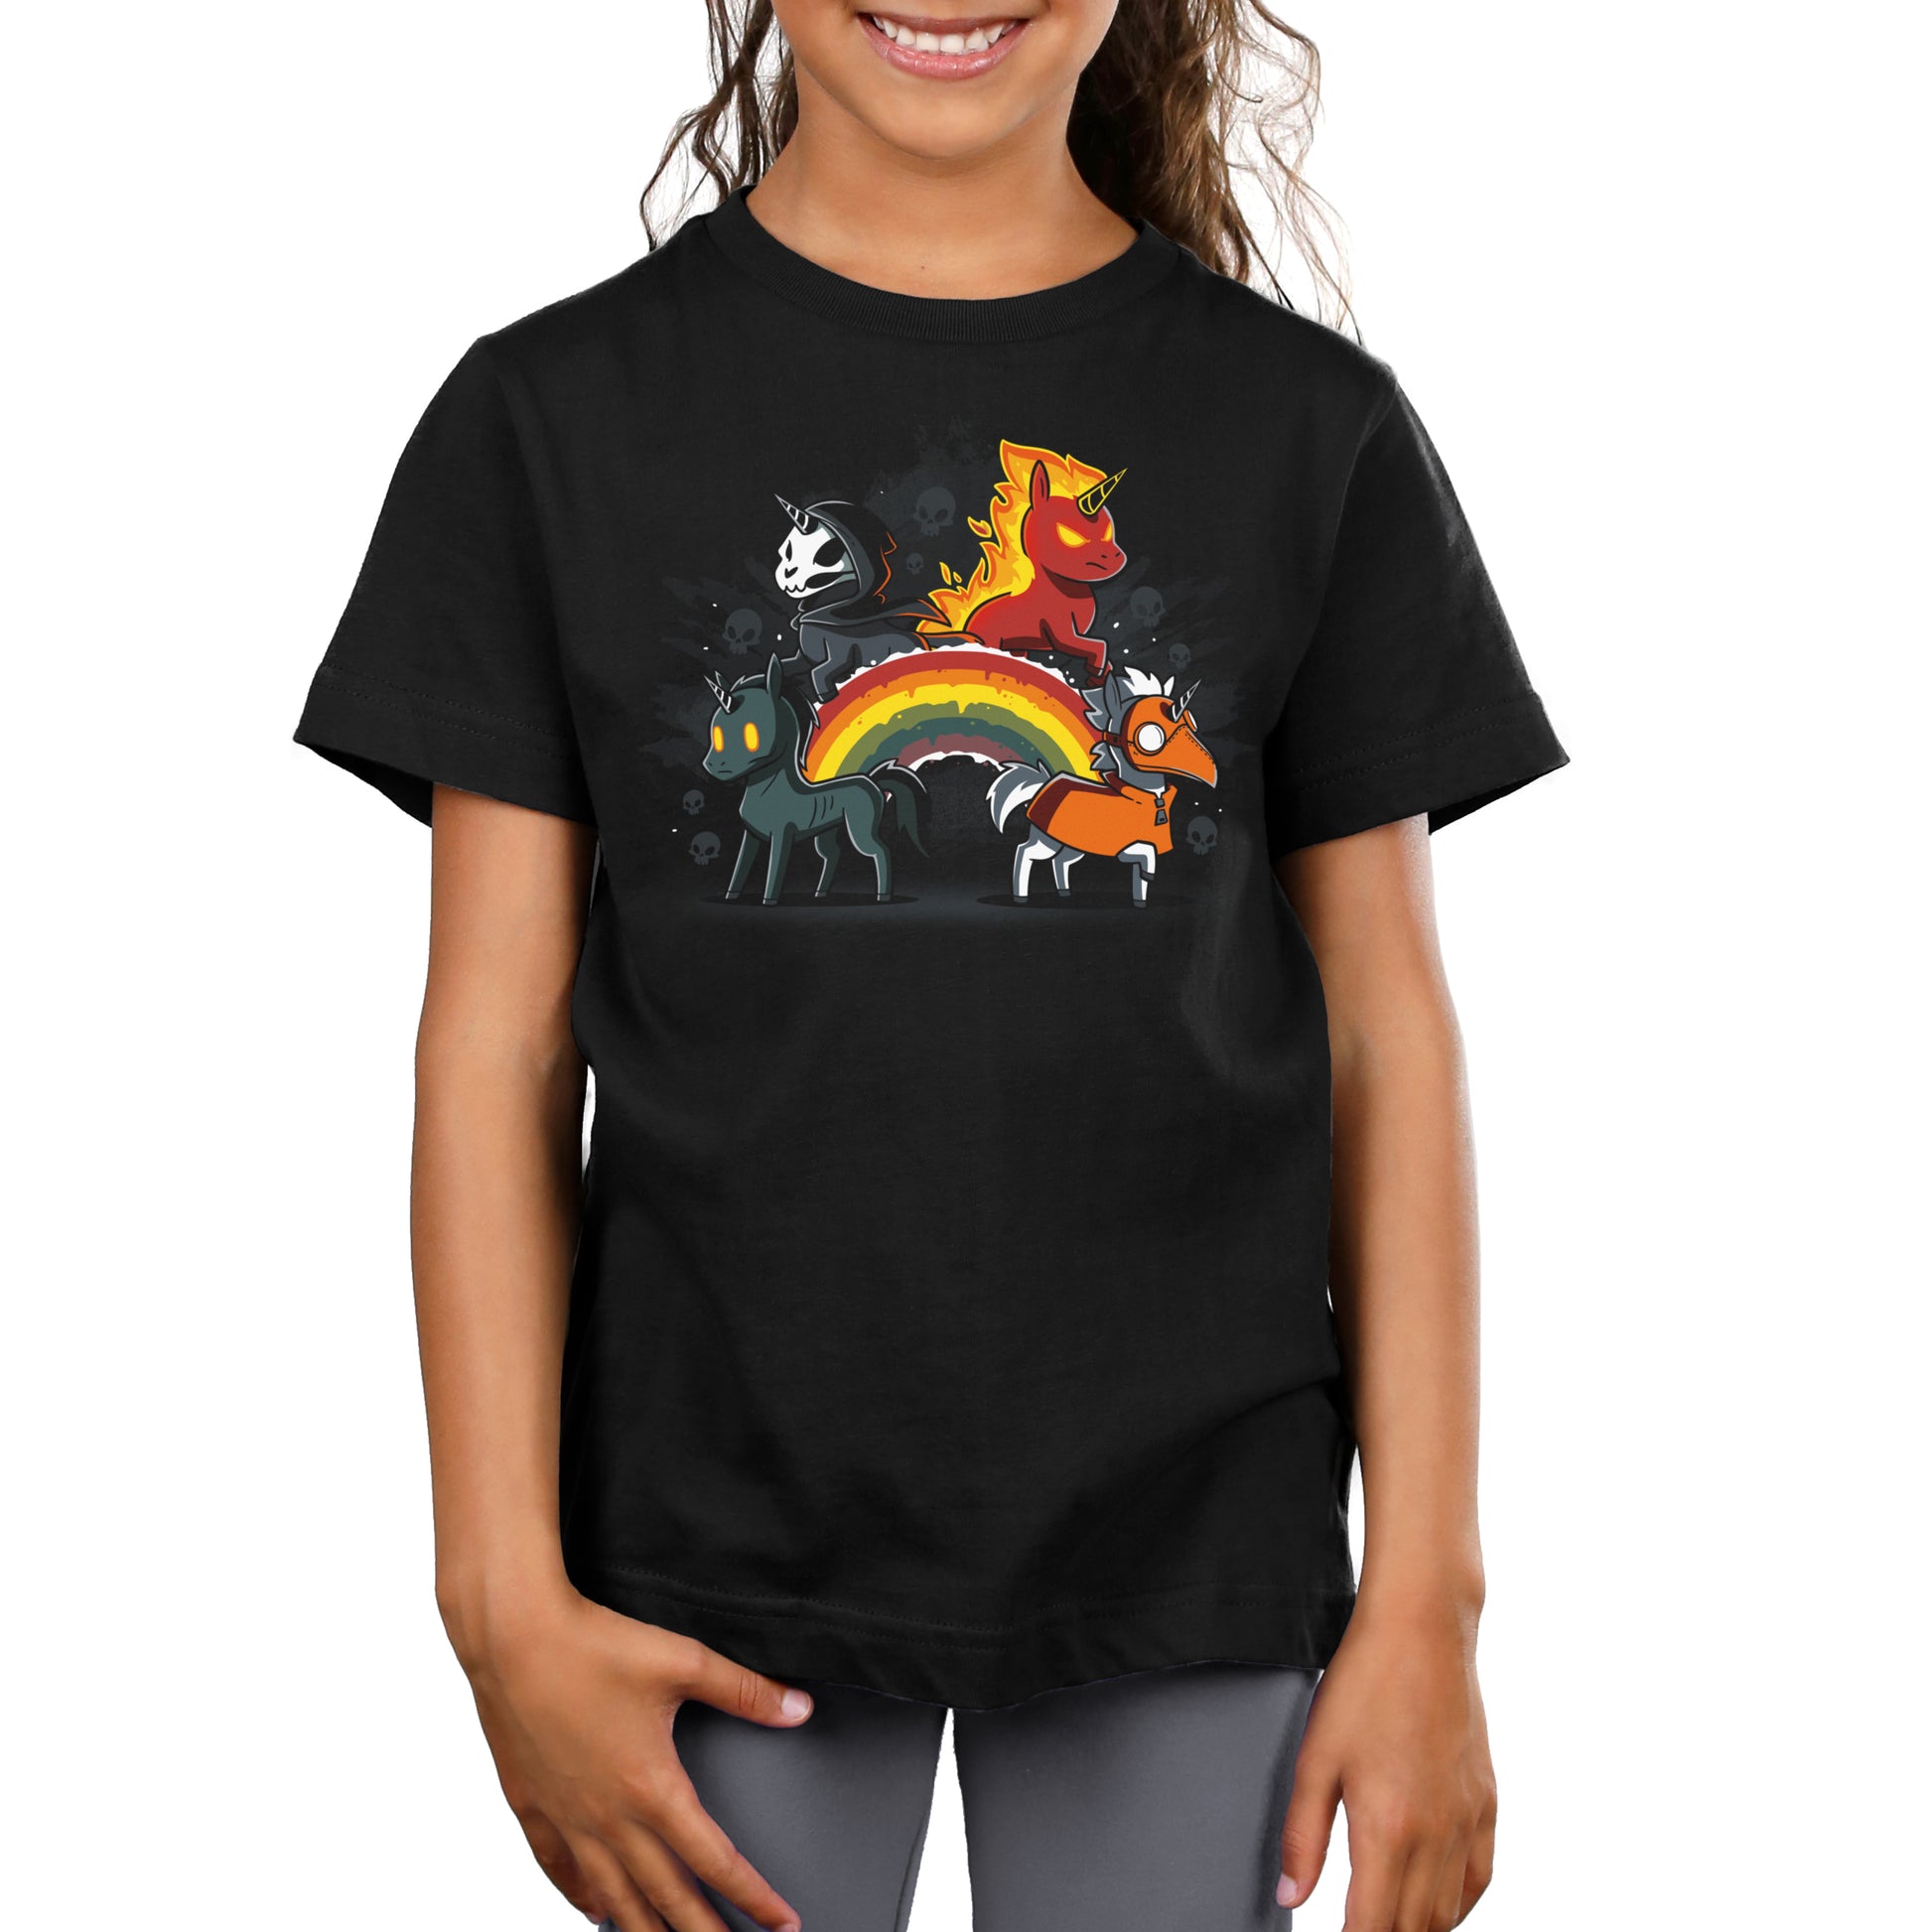 A girl wearing a "Four Unicorns of the Apocalypse pt 2" t-shirt by TeeTurtle with an image of a unicorn.